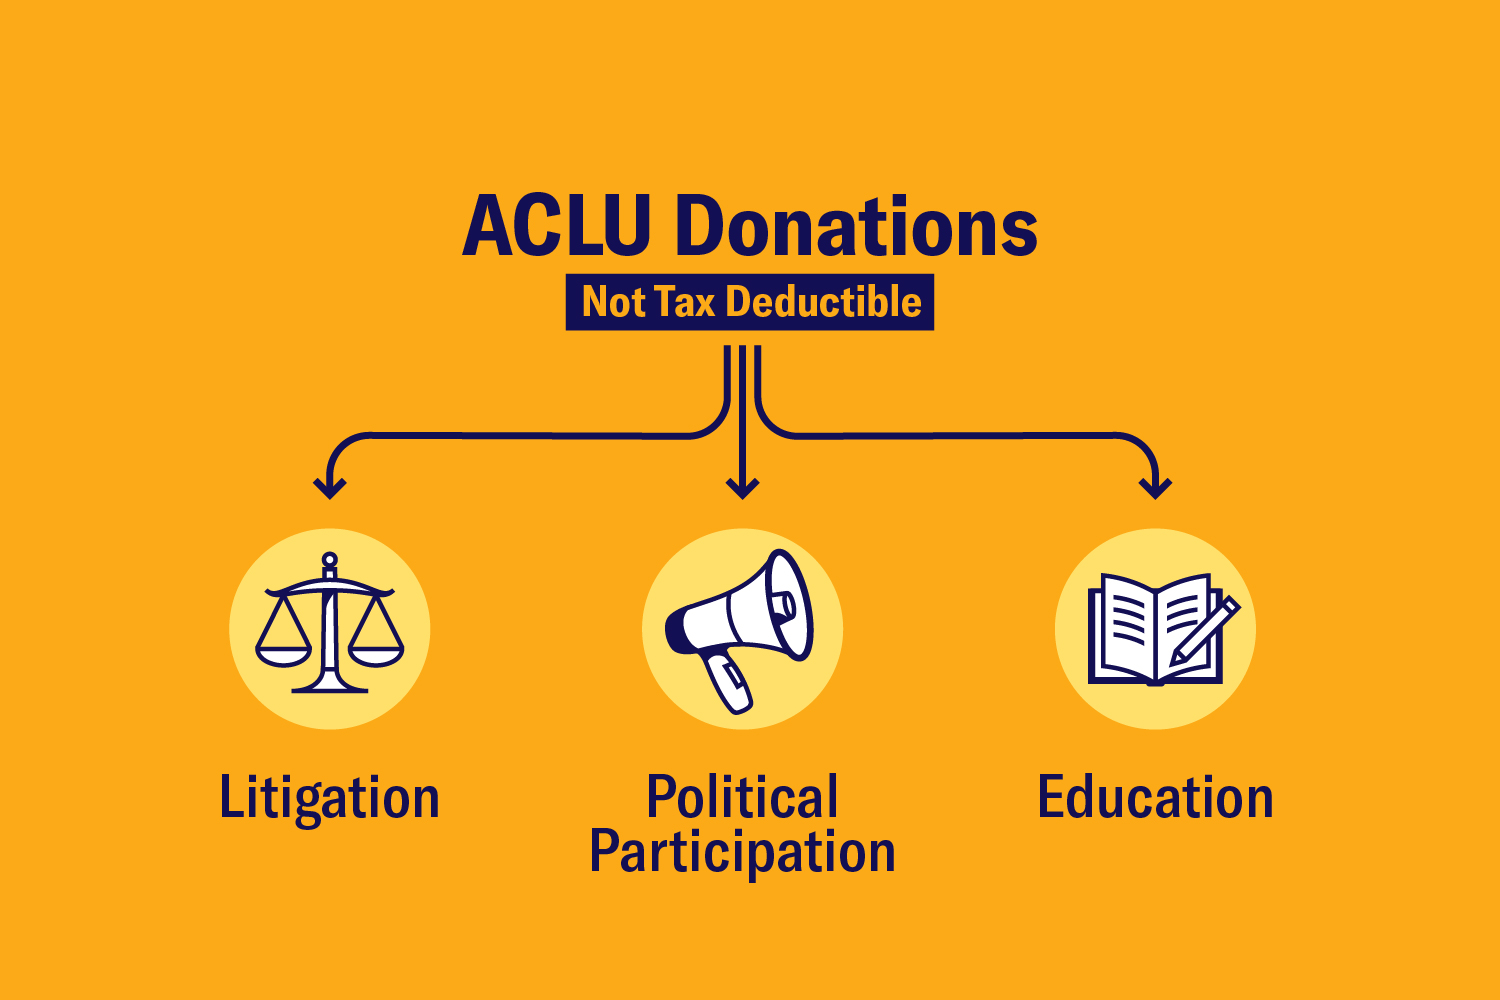 ACLU mission represented by icons of scale, megaphone, and book